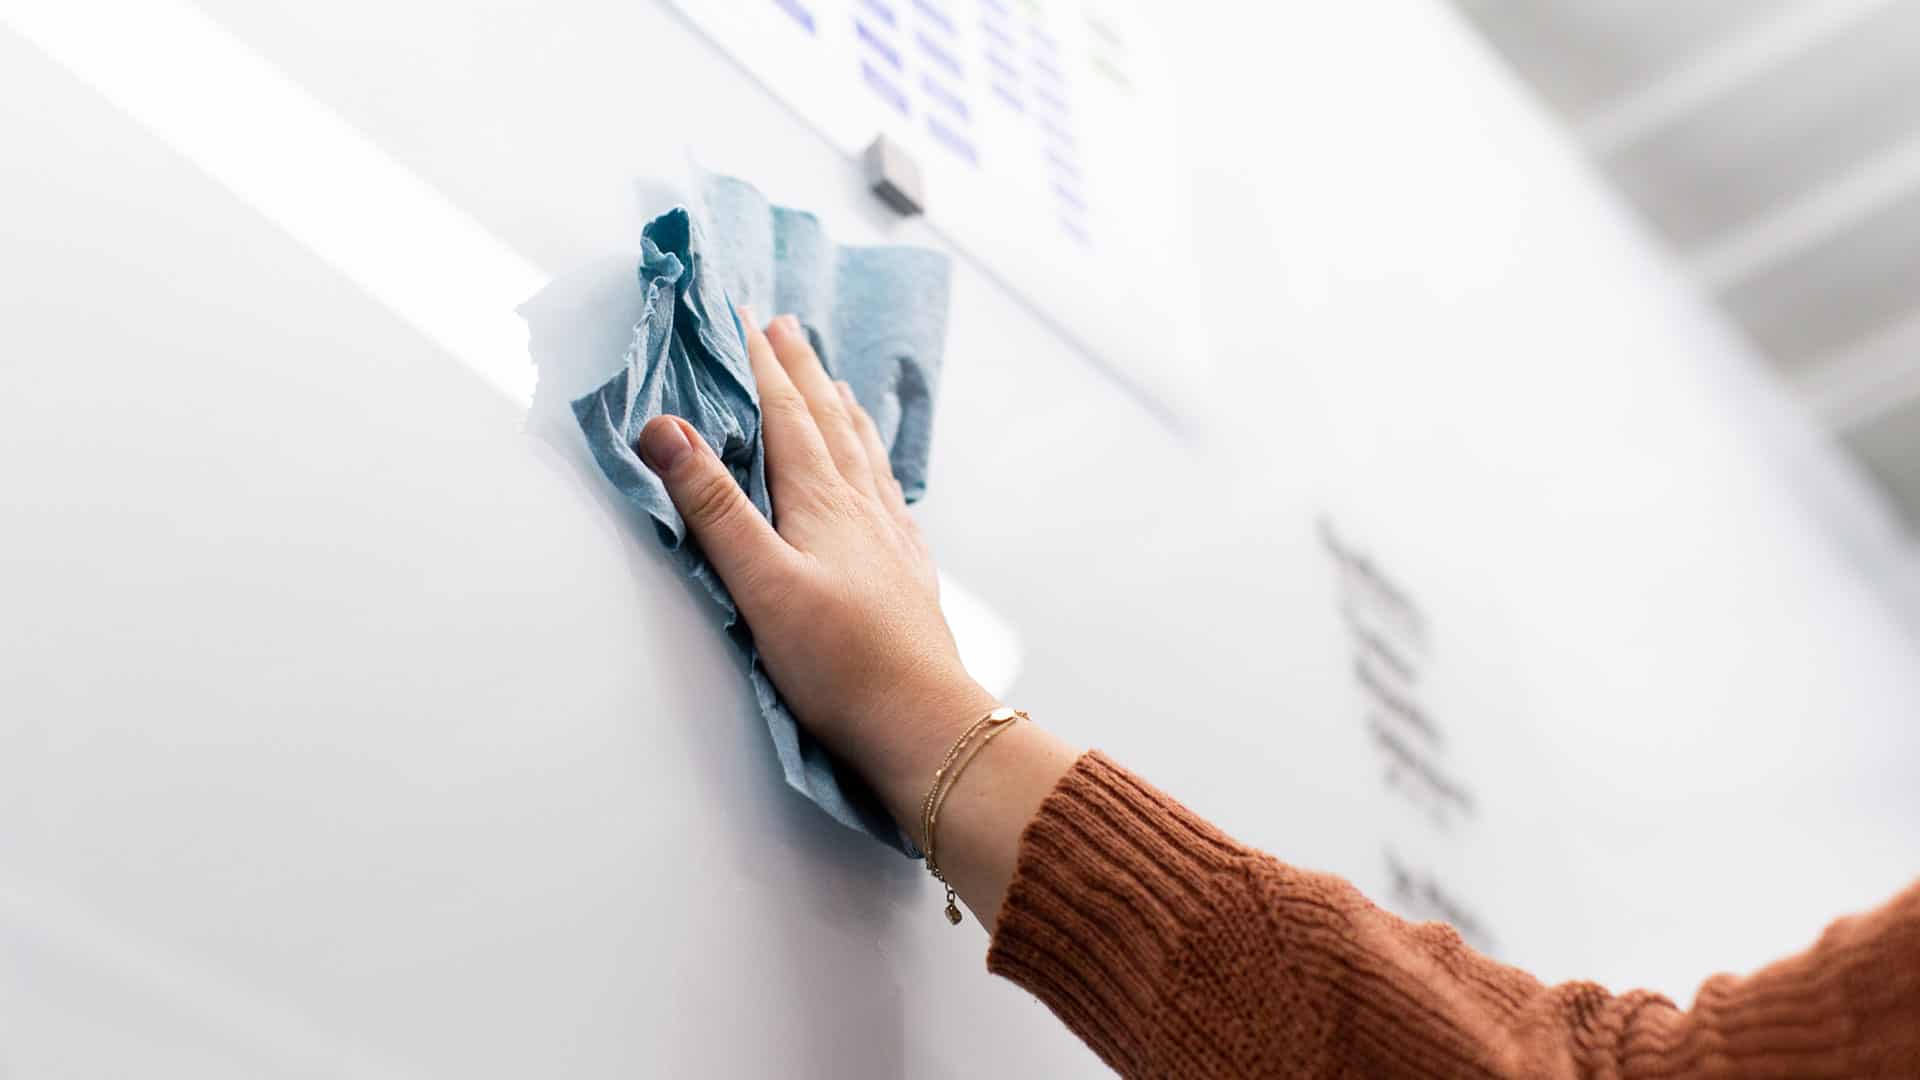 How to Clean a Dry Erase Board